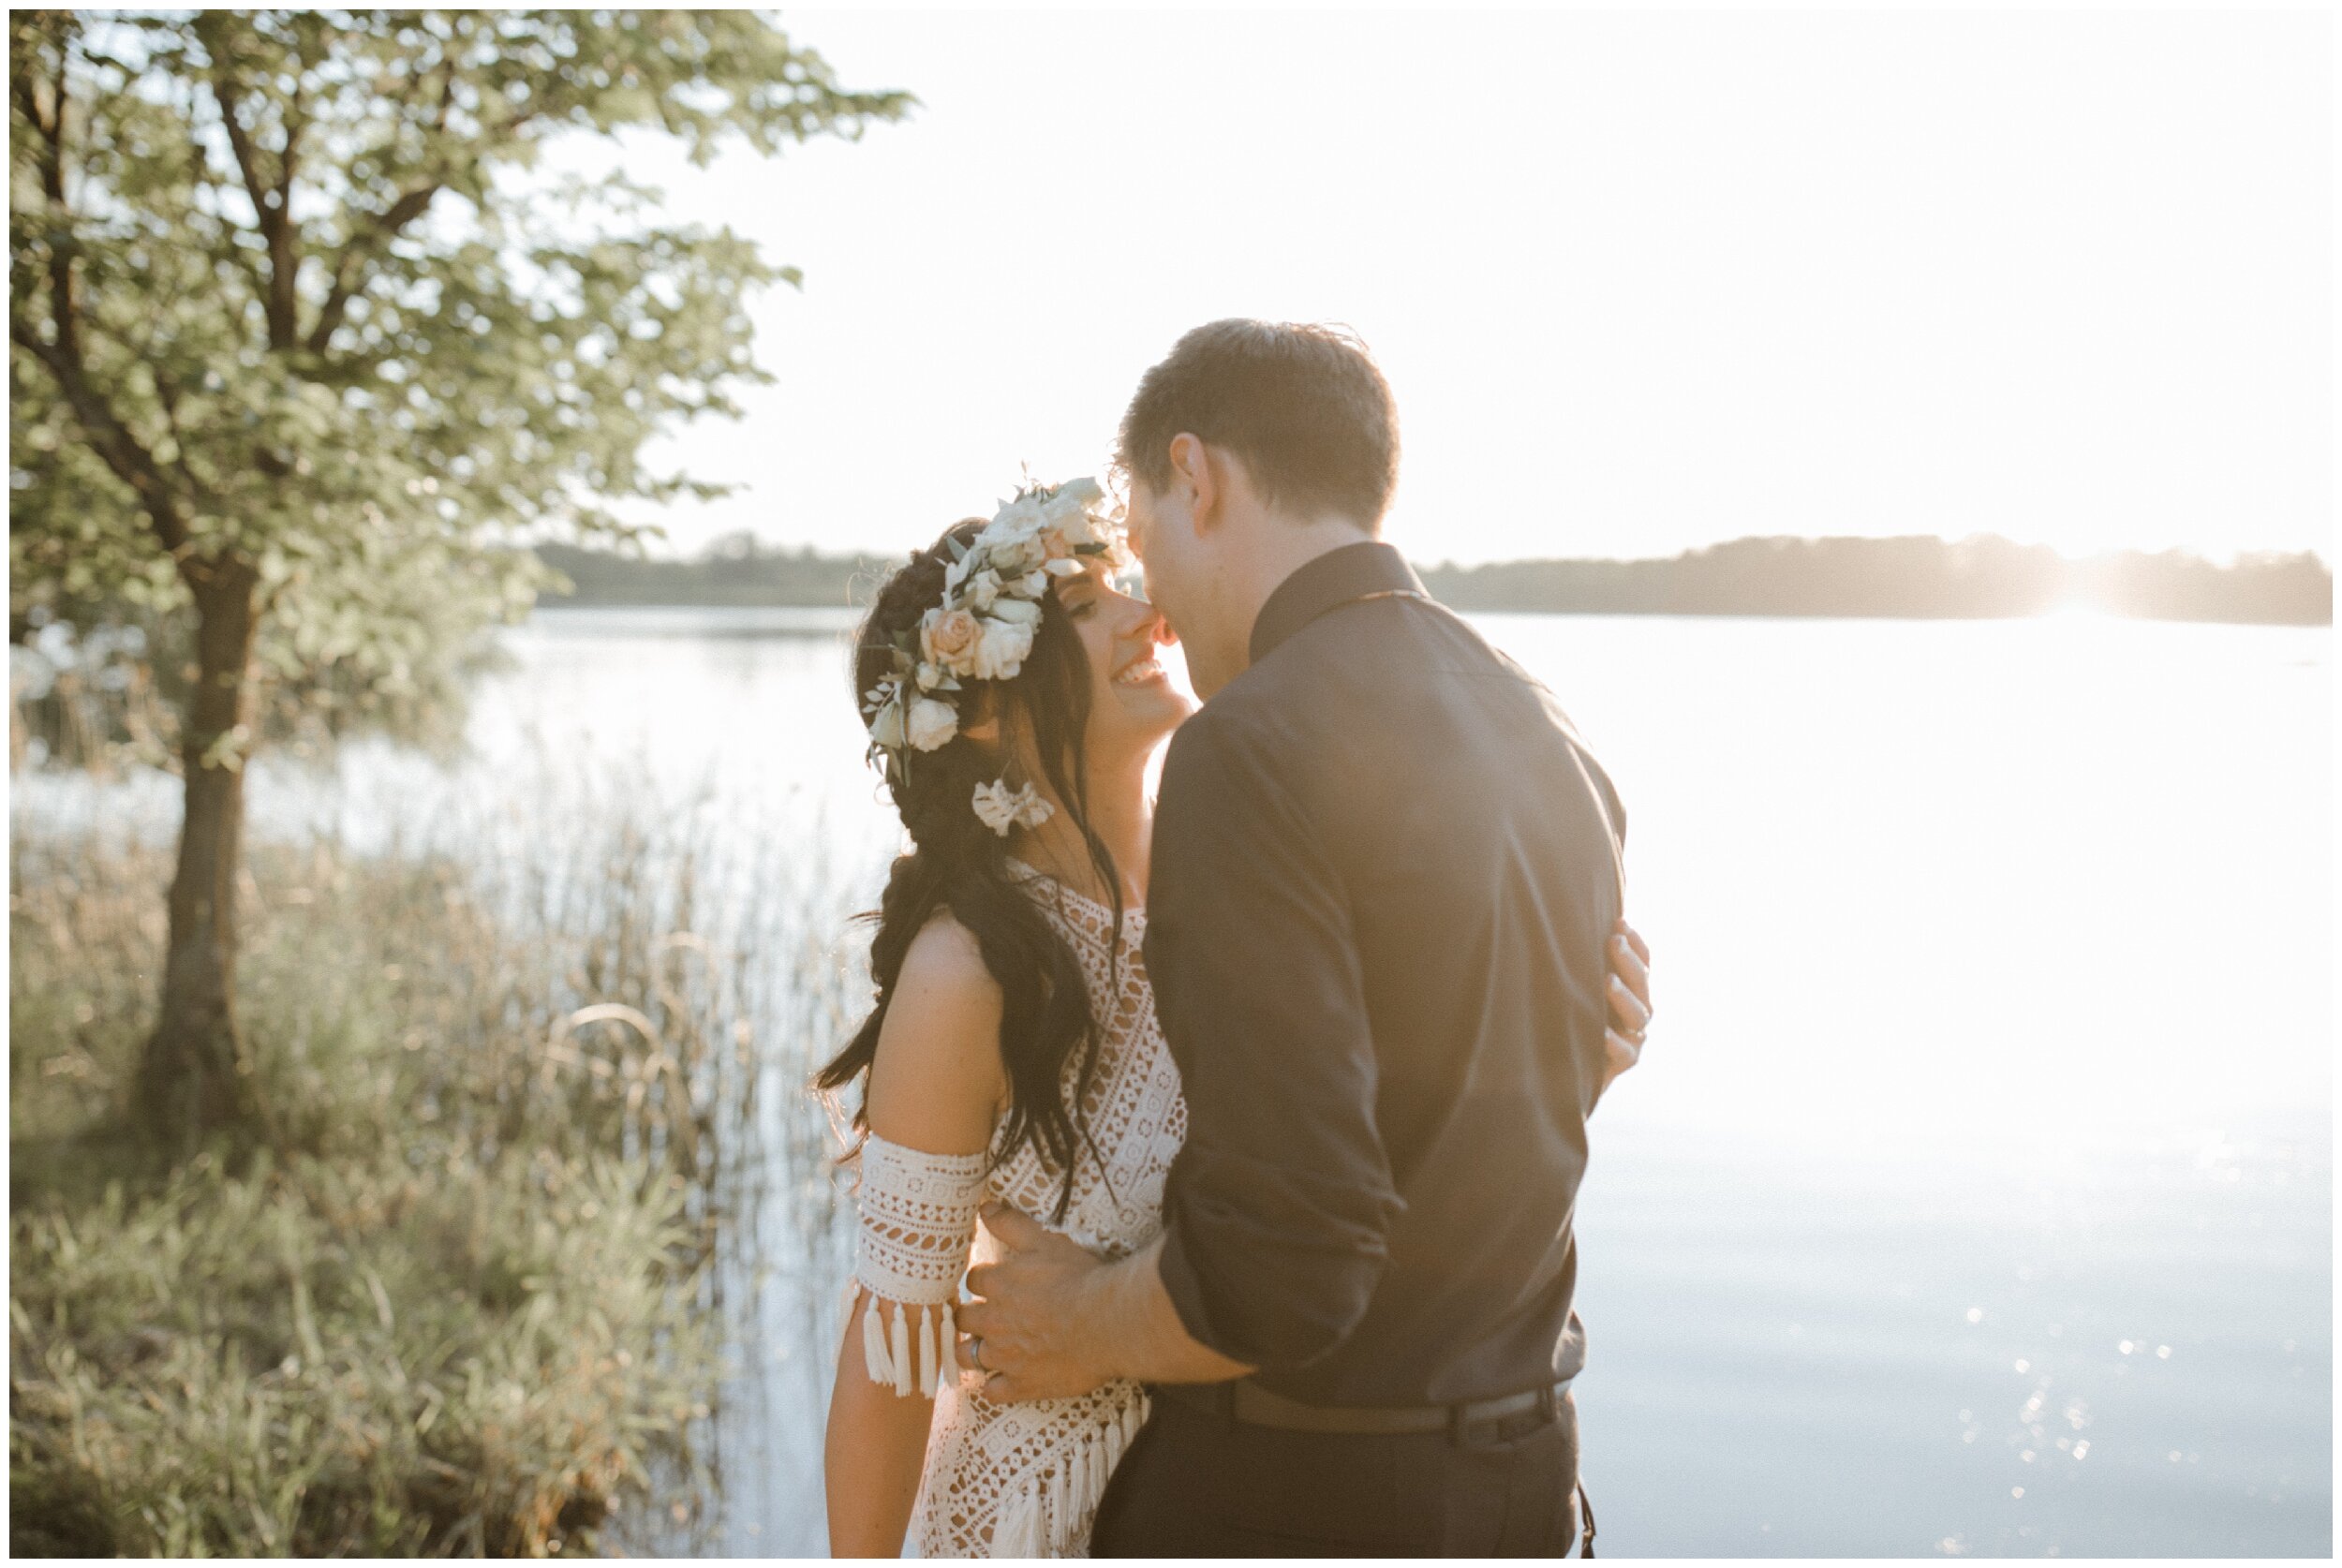 Bride and groom standing in front of lake during sunset at their Minnesota summer backyard wedding